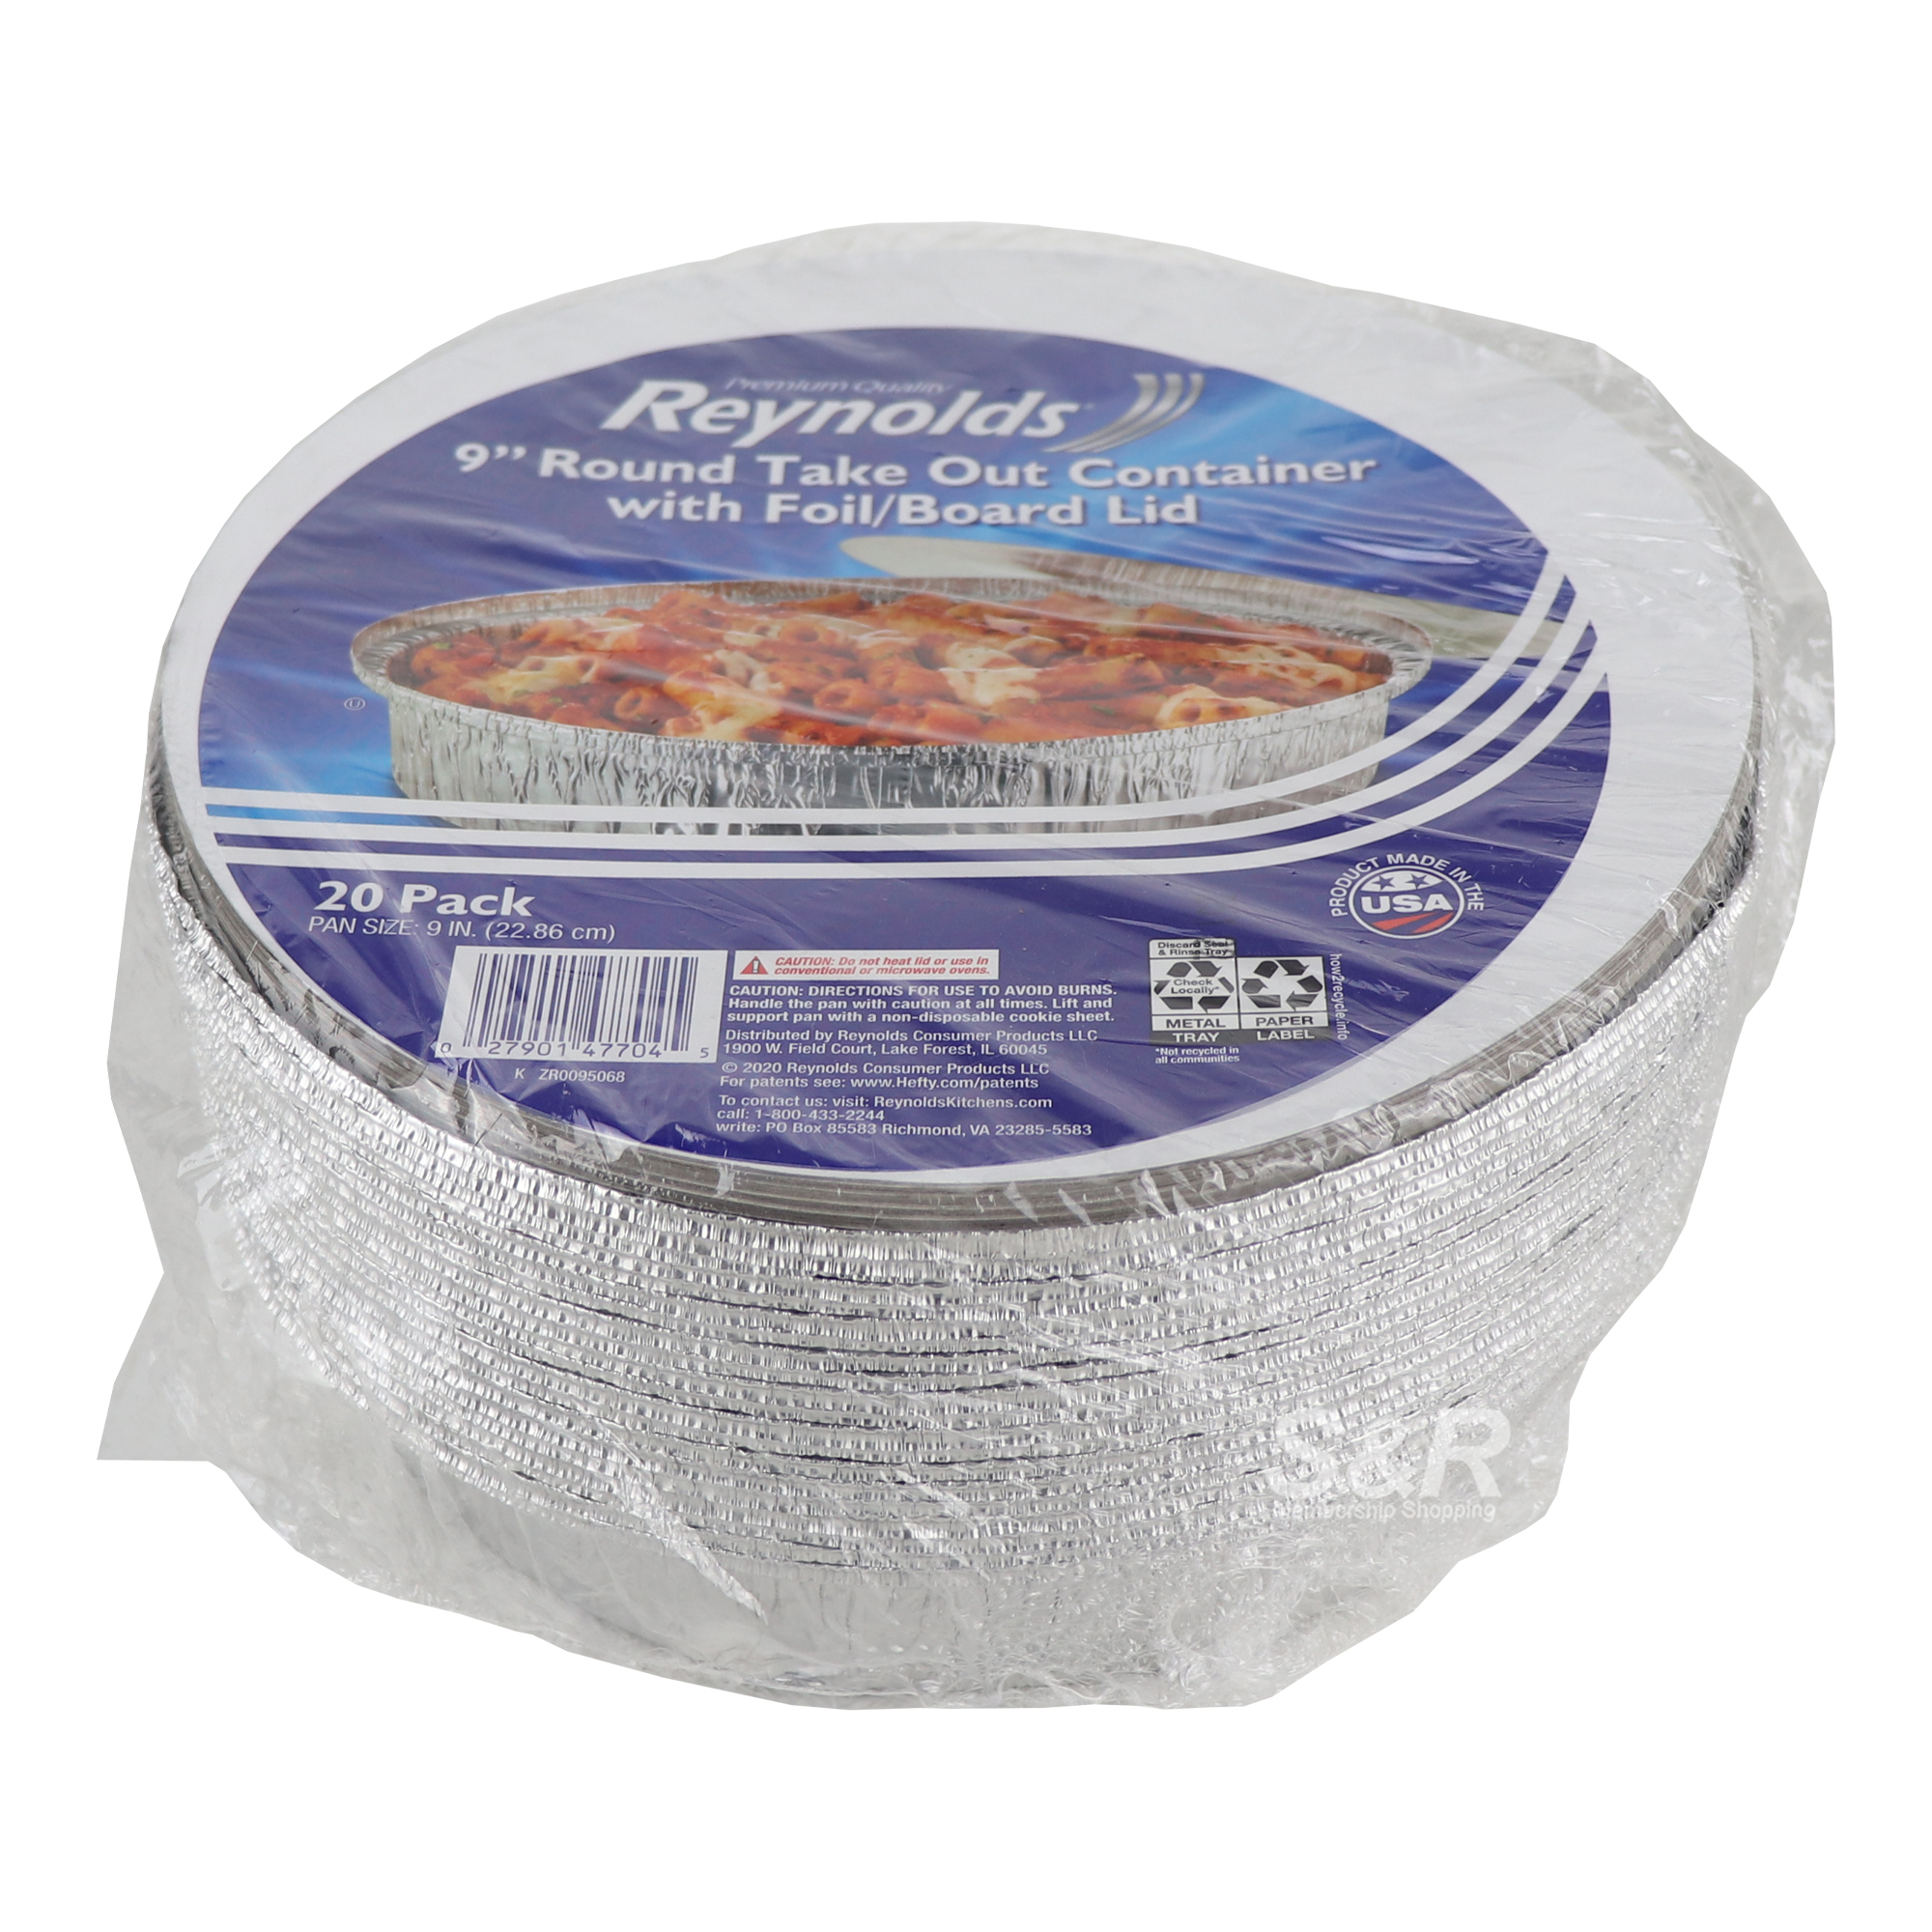 Reynolds 9in Round Take Out Container with Foil Lid 20pcs